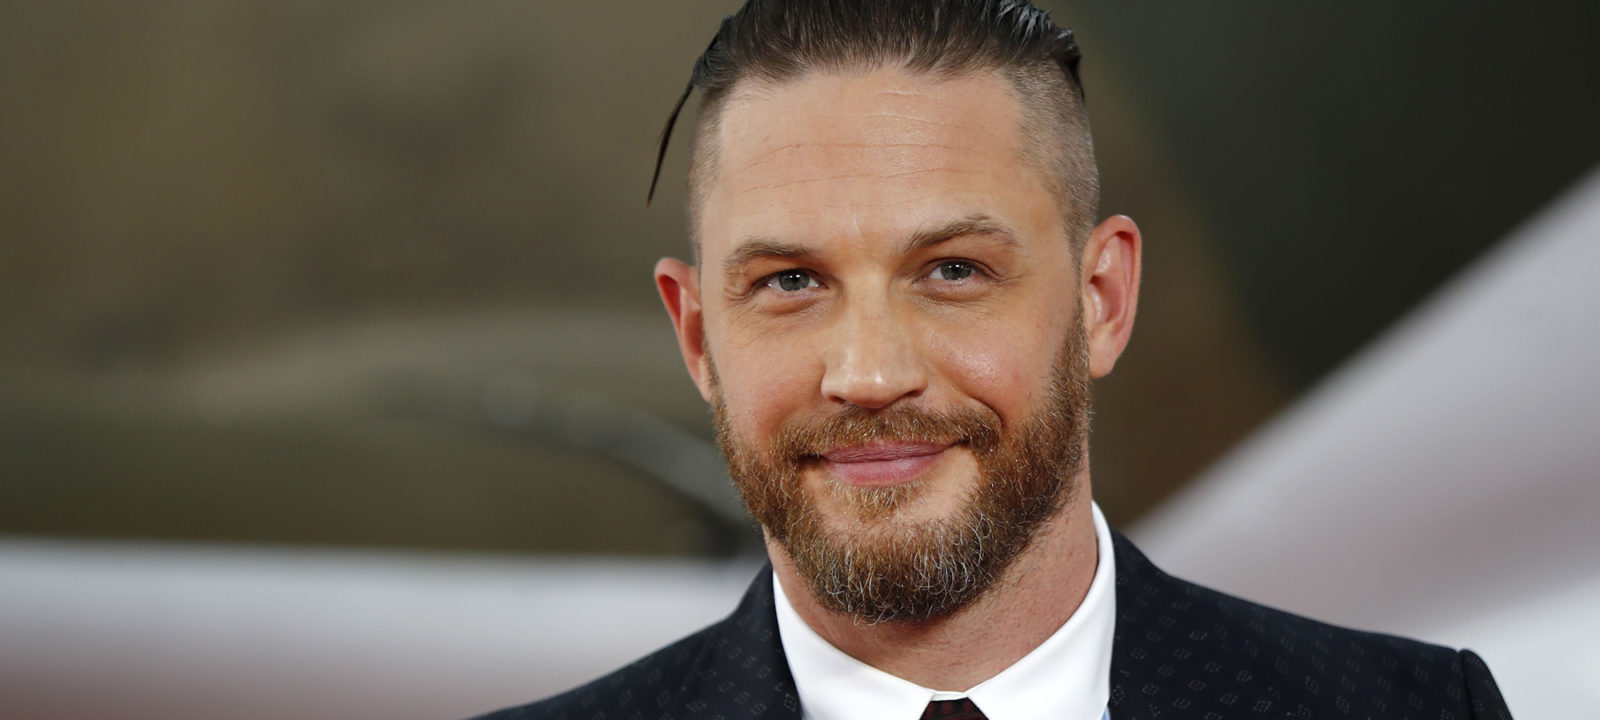 British actor Tom Hardy poses for a photograph upon arrival for the world premiere of "Dunkirk" in London on July 13, 2017.
 / AFP PHOTO / Tolga AKMEN        (Photo credit should read TOLGA AKMEN/AFP/Getty Images)